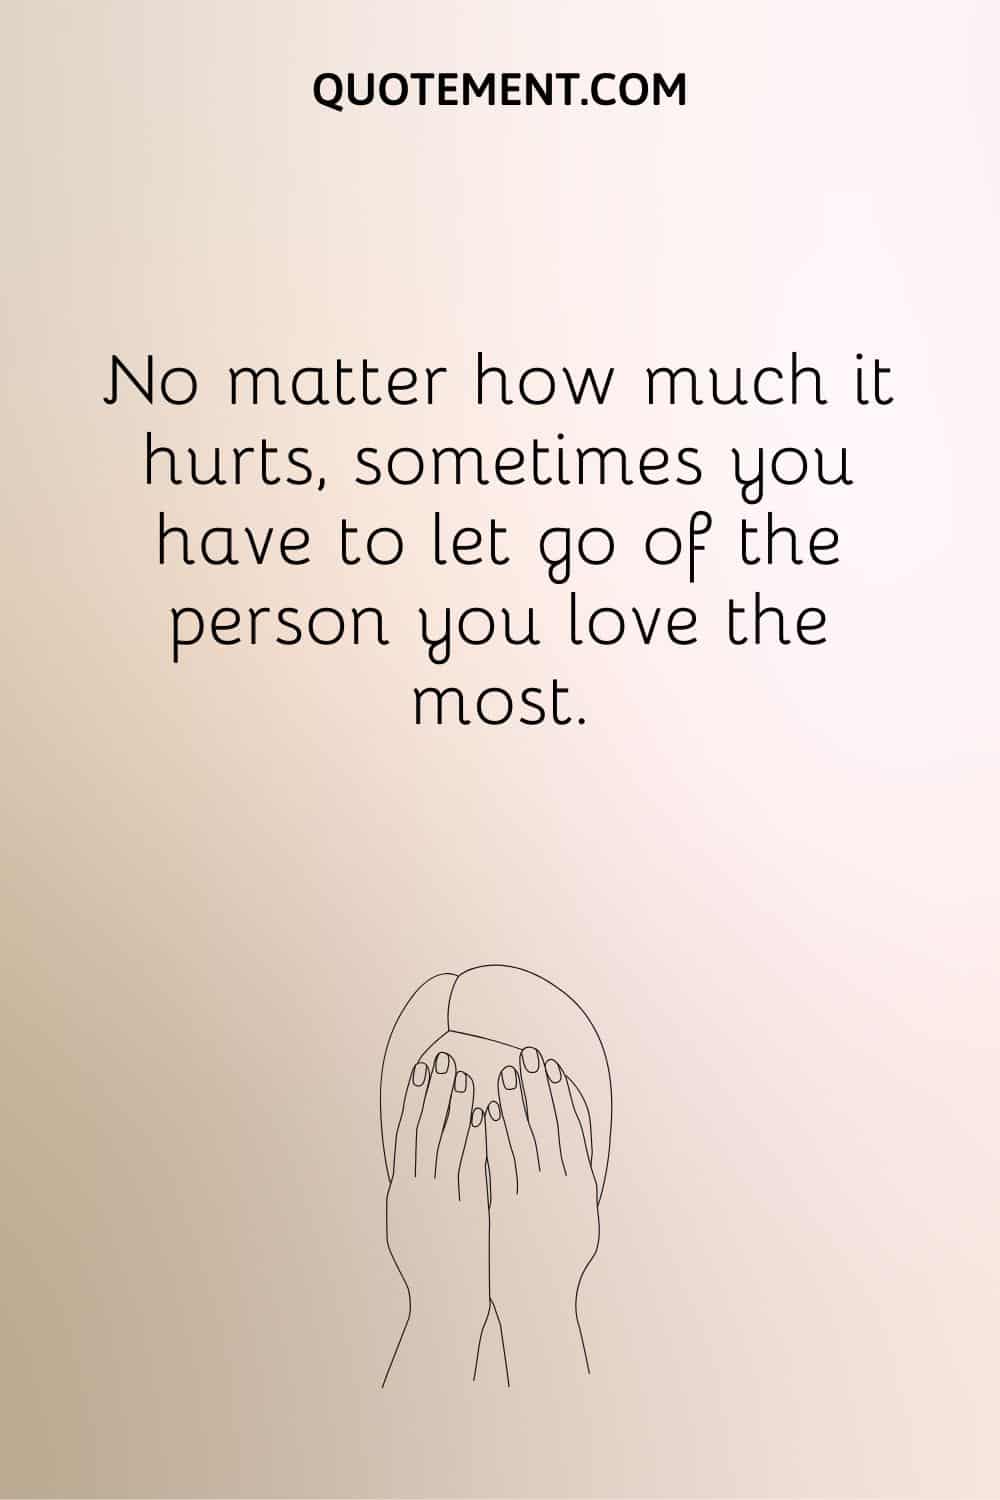 No matter how much it hurts, sometimes you have to let go of the person you love the most.
